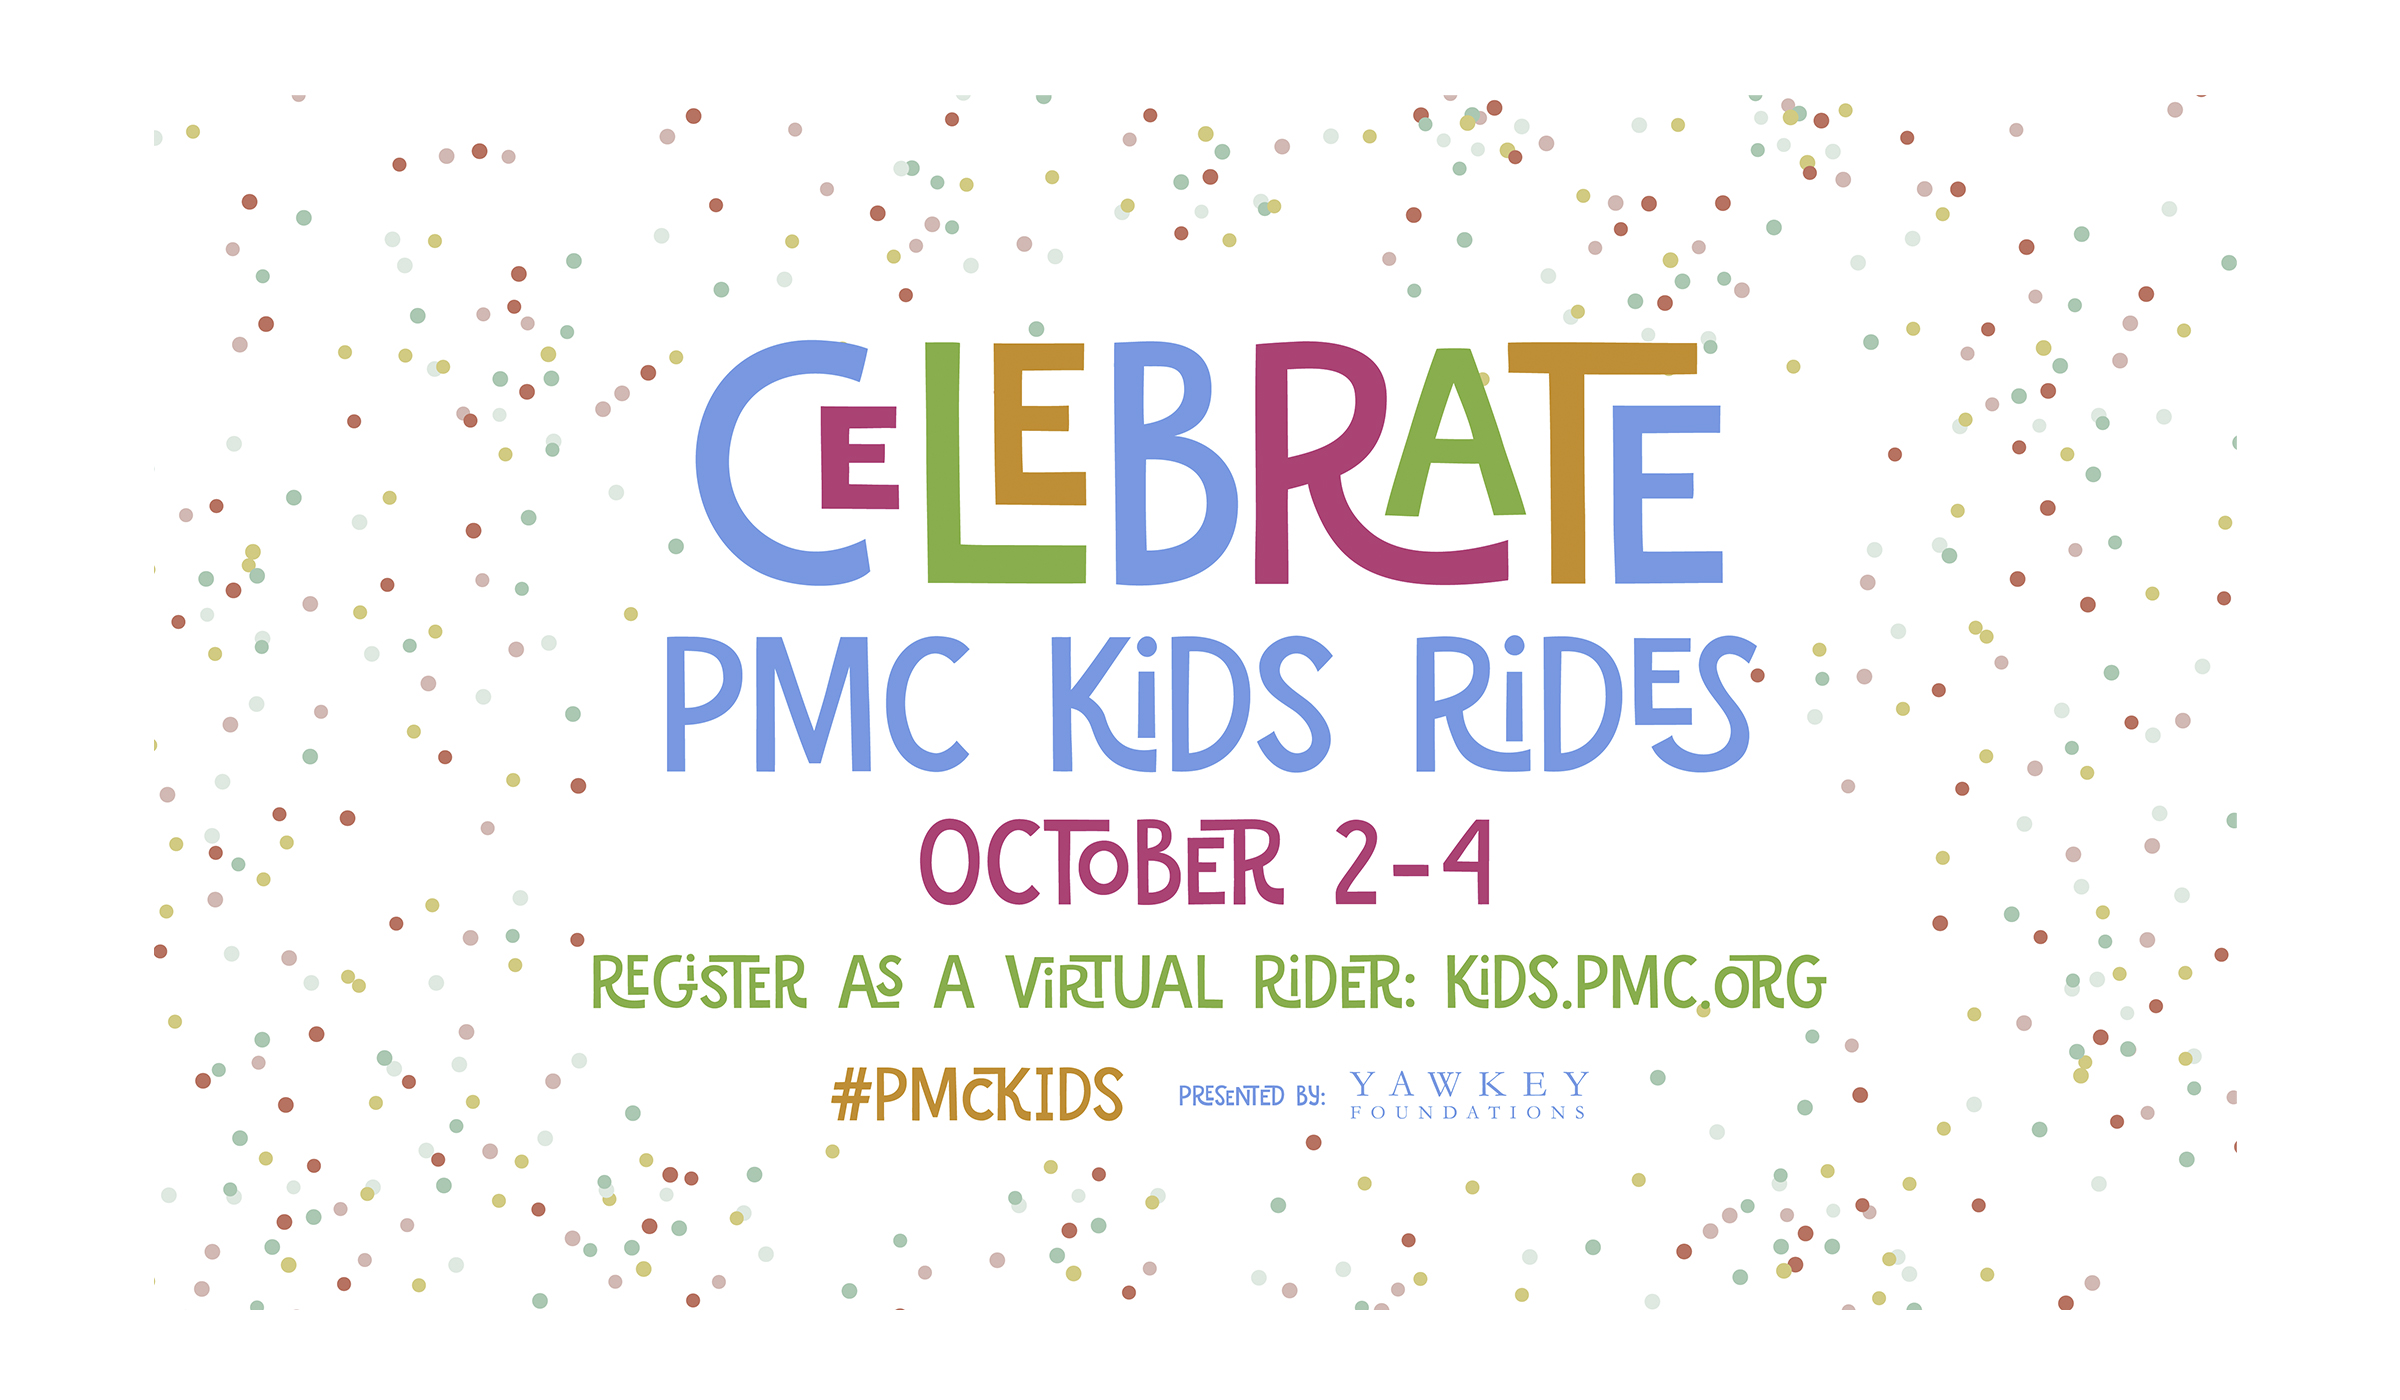 Join the PMC Kids Rides Community on October 2–4